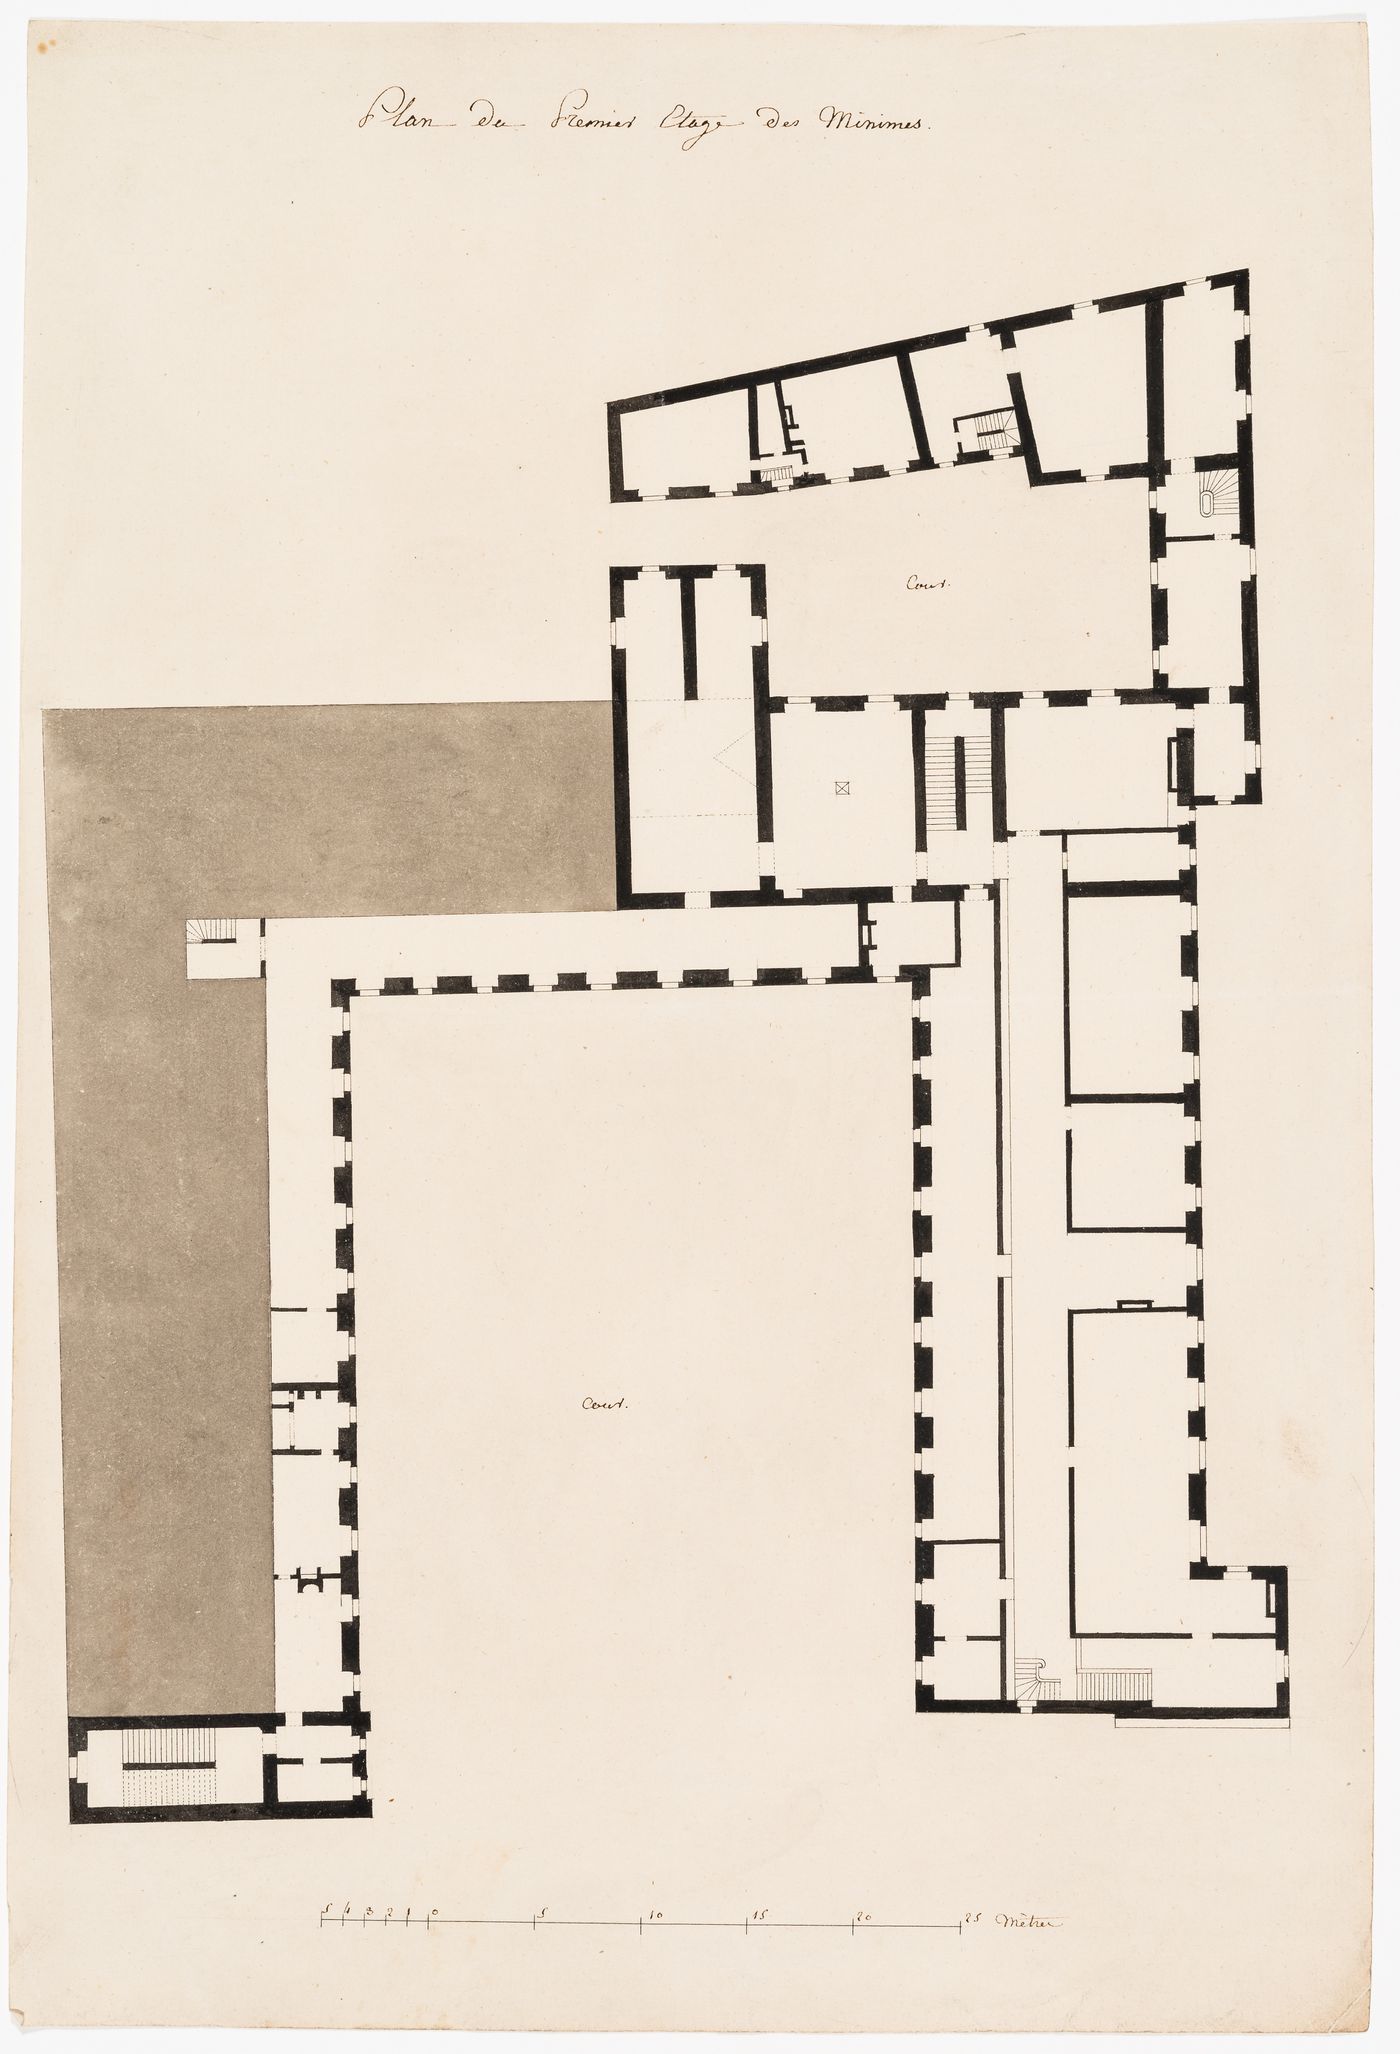 Project for alterations to the Caserne des Minimes, rue des Minimes: First floor plan